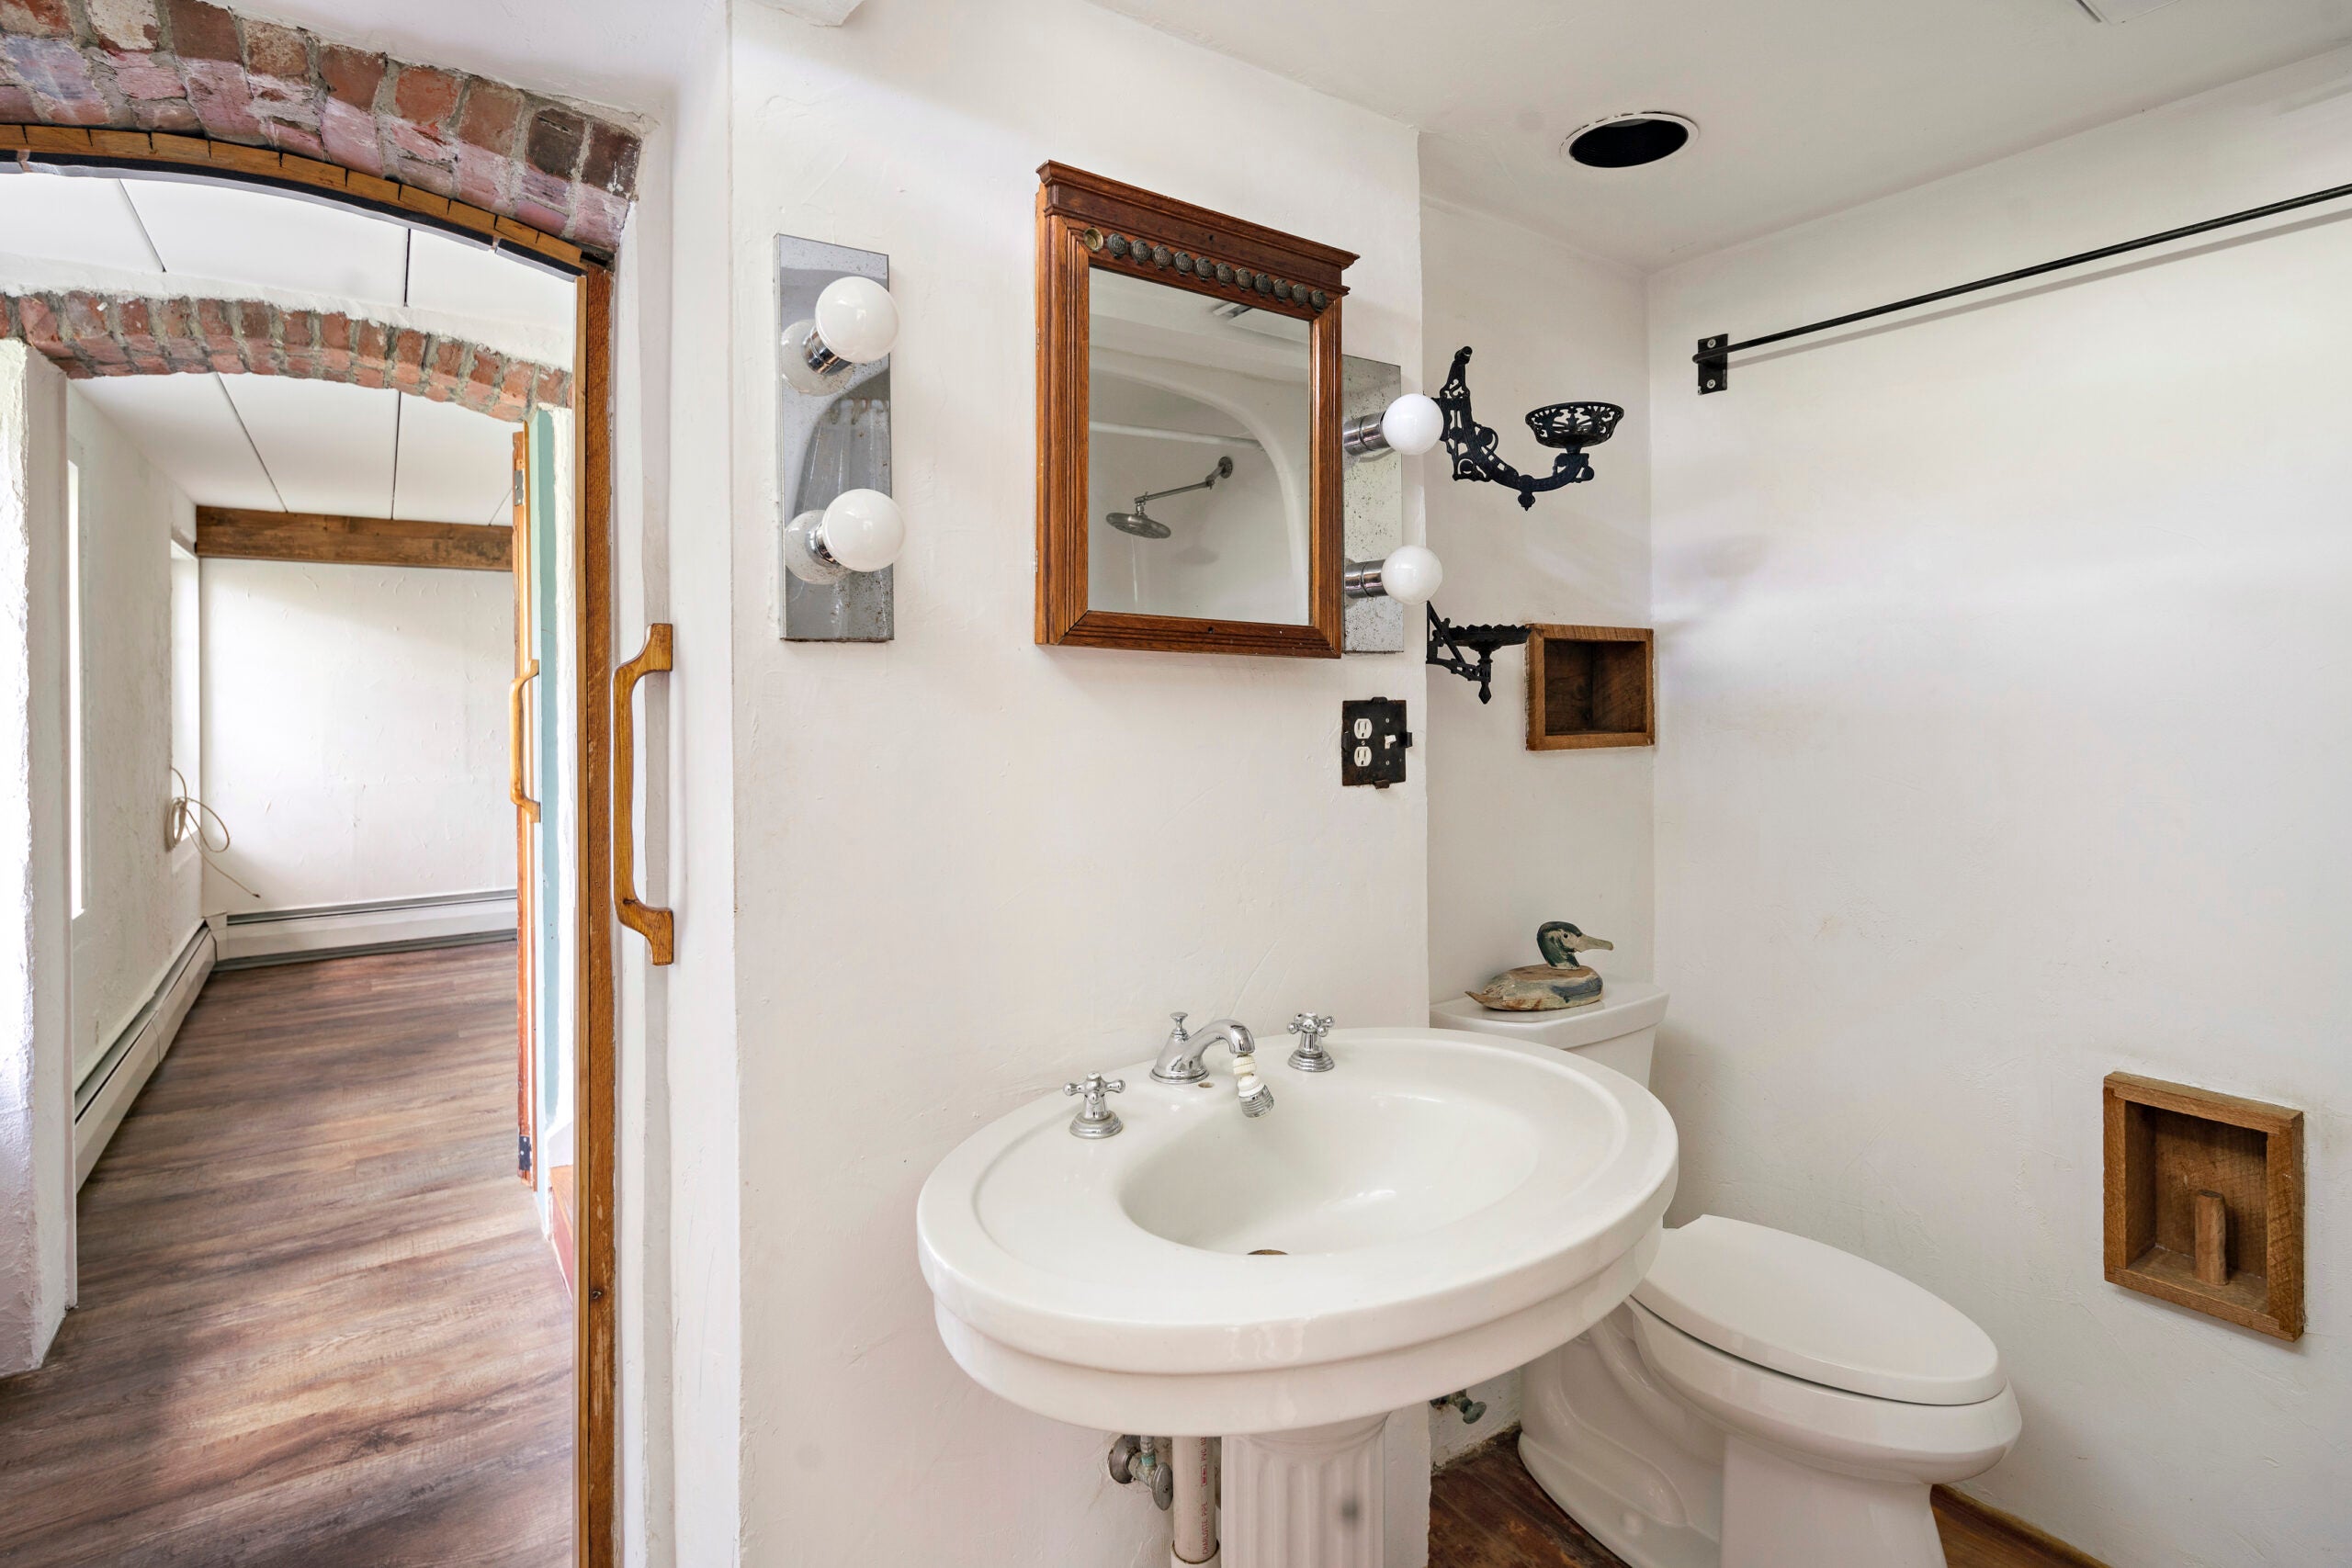 A bathroom with a brick archway and a pedestal sink.